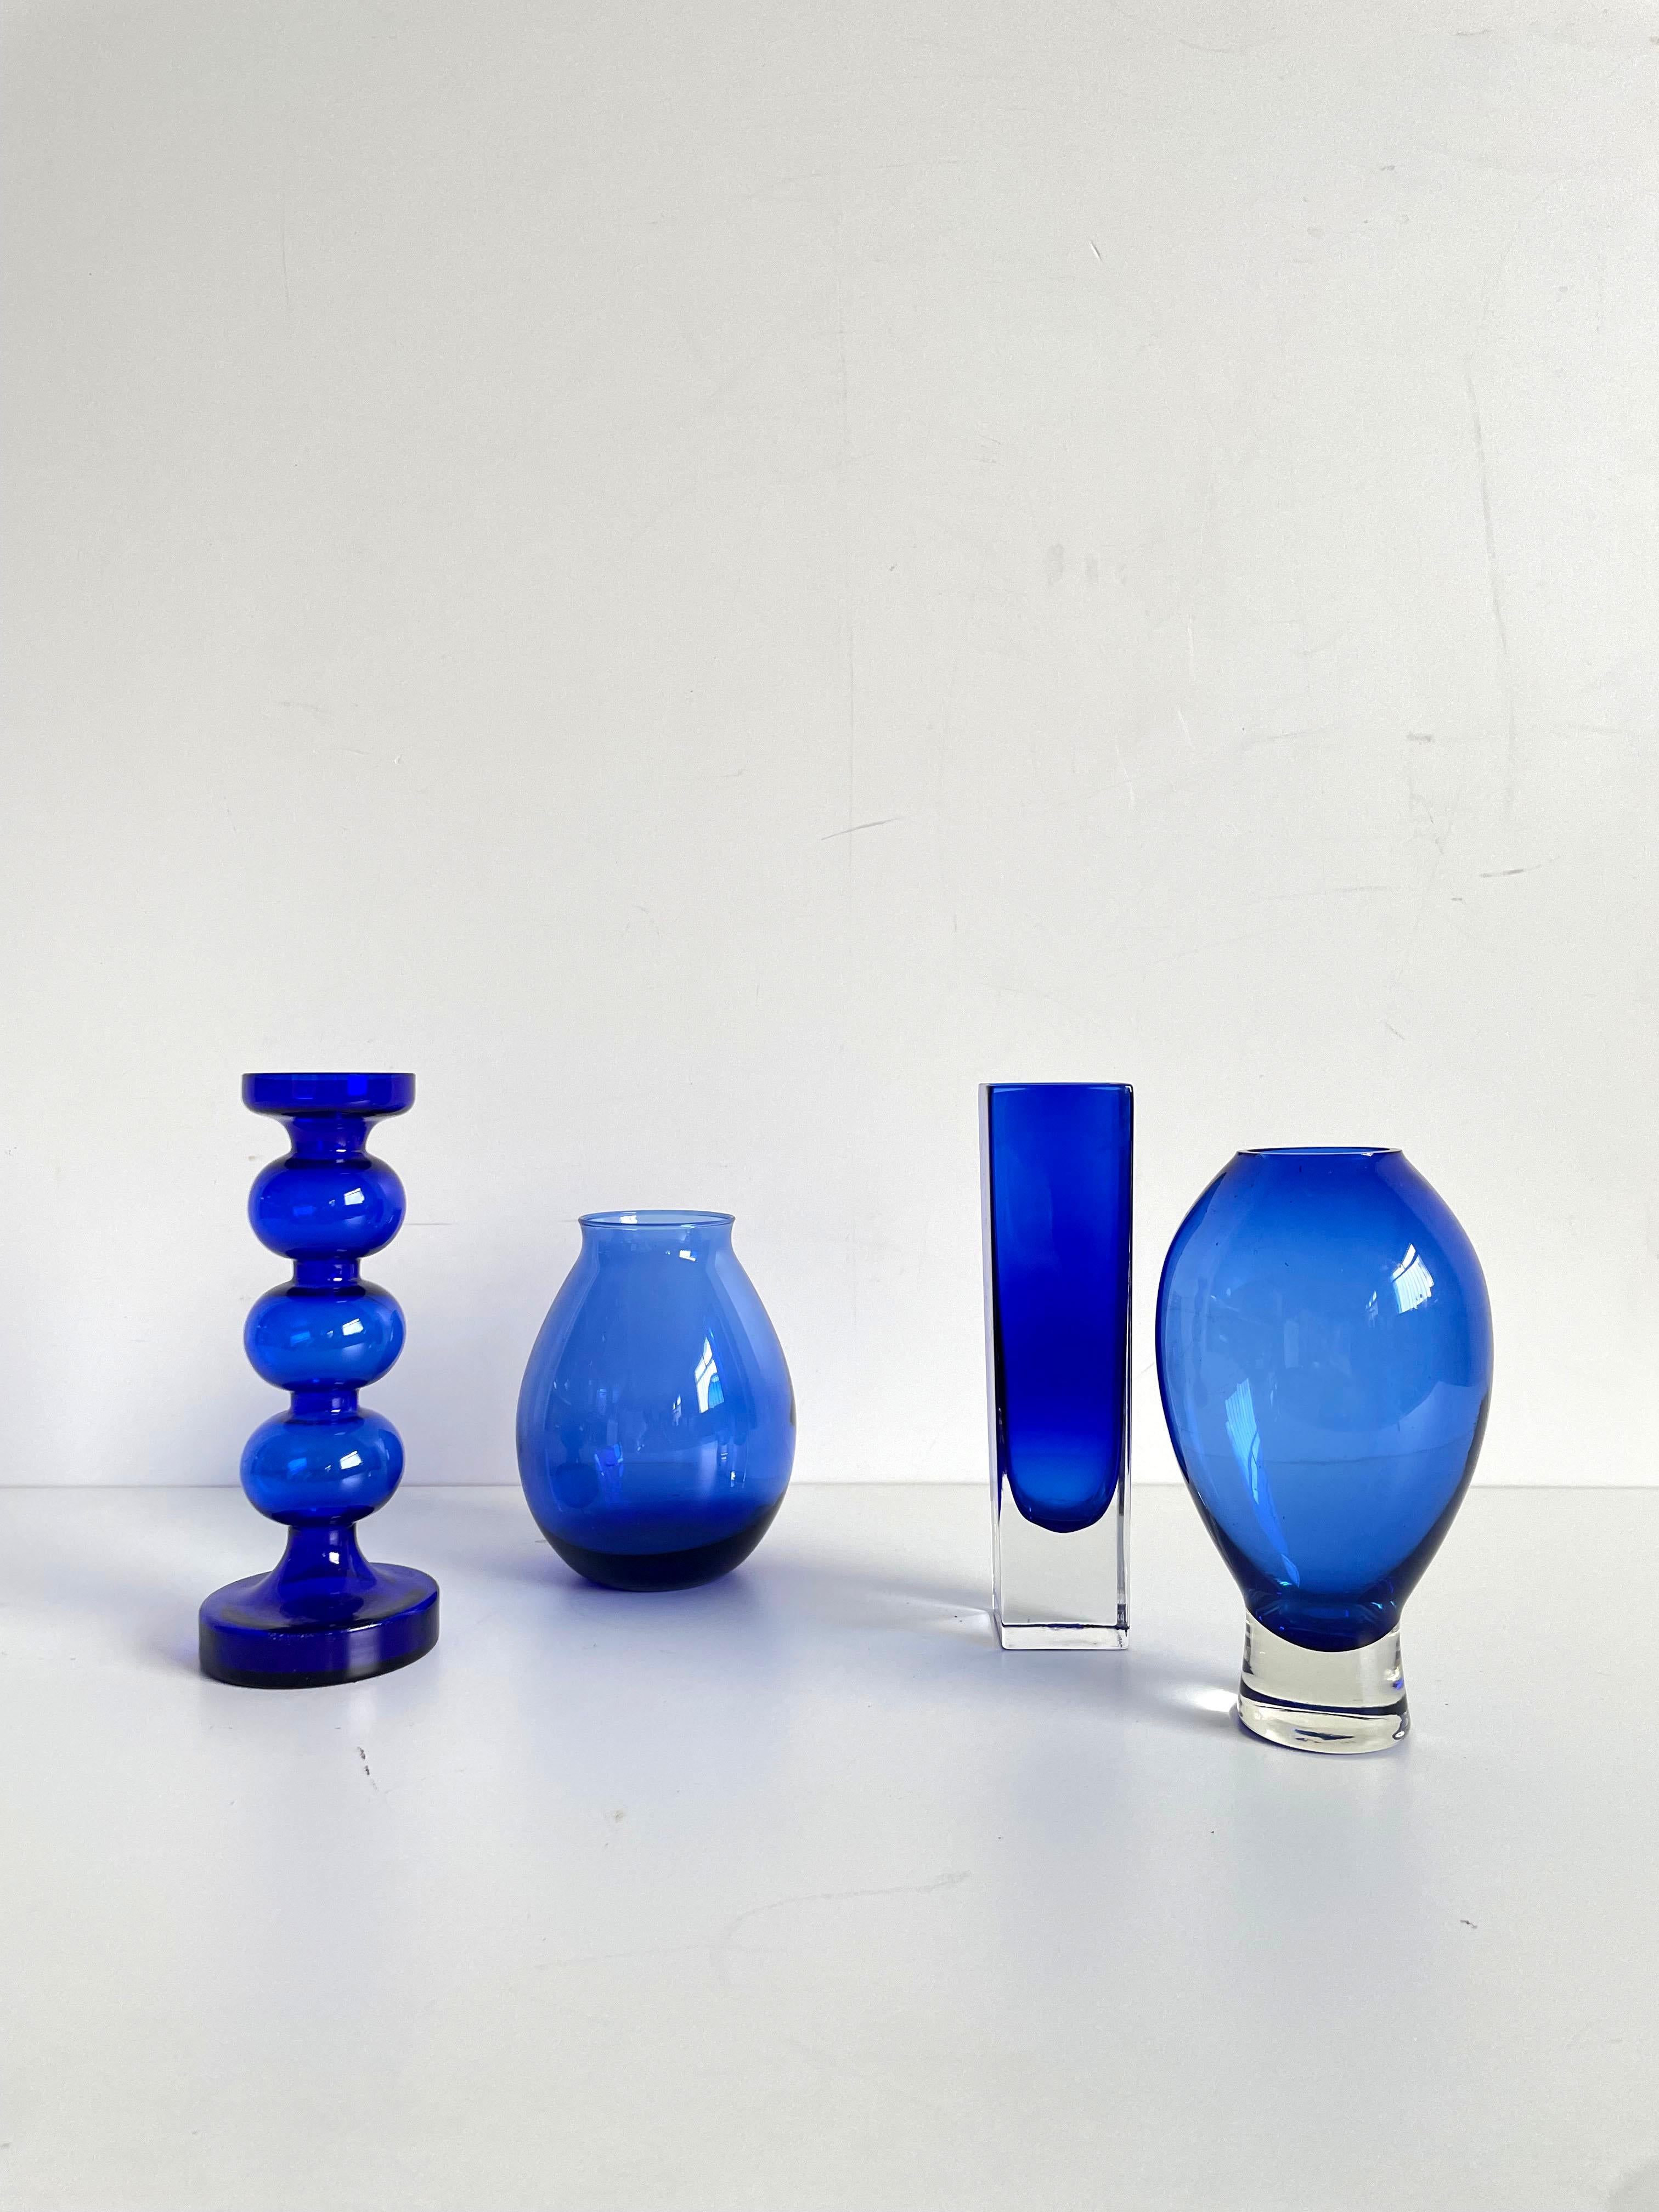 Beautiful set of 4 different Mid-century Scandinavian art glass vases in blue color

One of the vases is designed by Alfred Taube (Germany), attribution for other 3 vases is unknown. 

Dimensions:
tall square shaped vase measures  22 x 5.5 x 5.5 cm